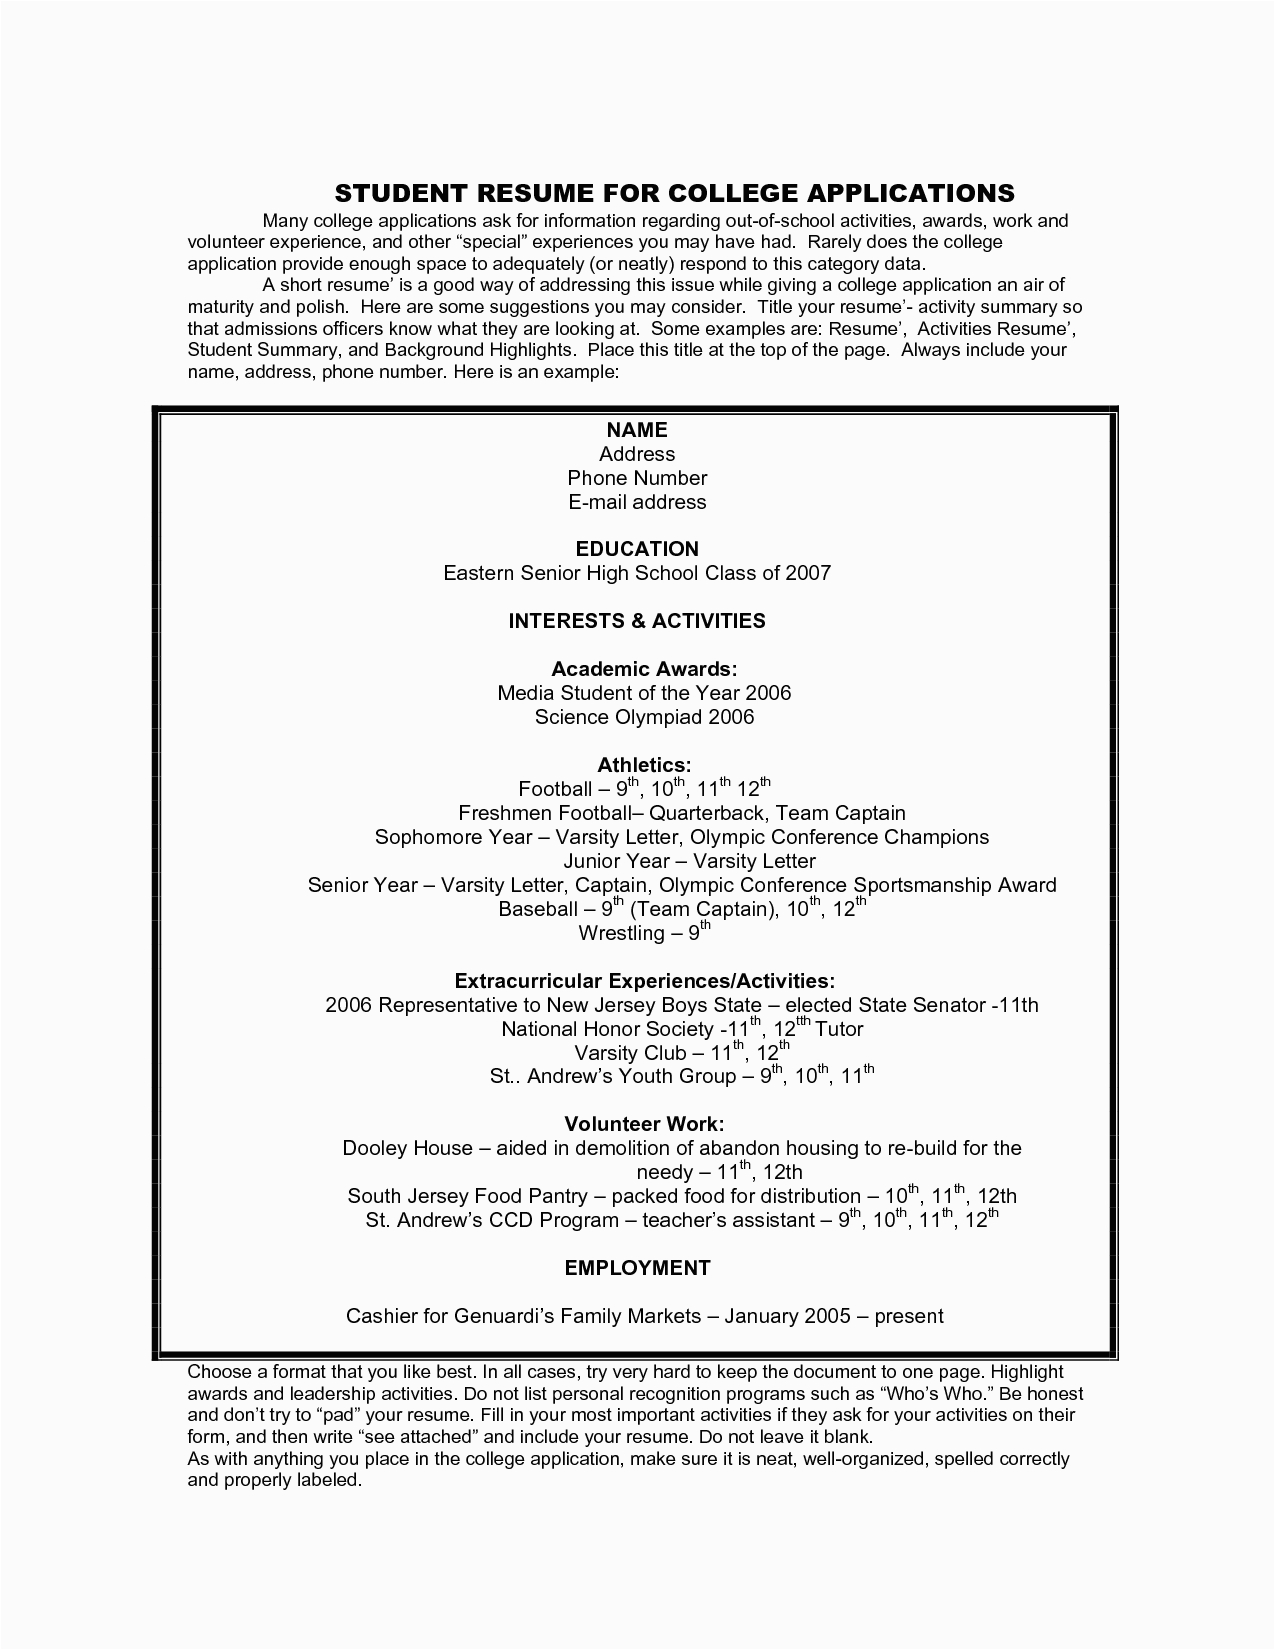 Sample Of A Resume for College Application College Admission Resume